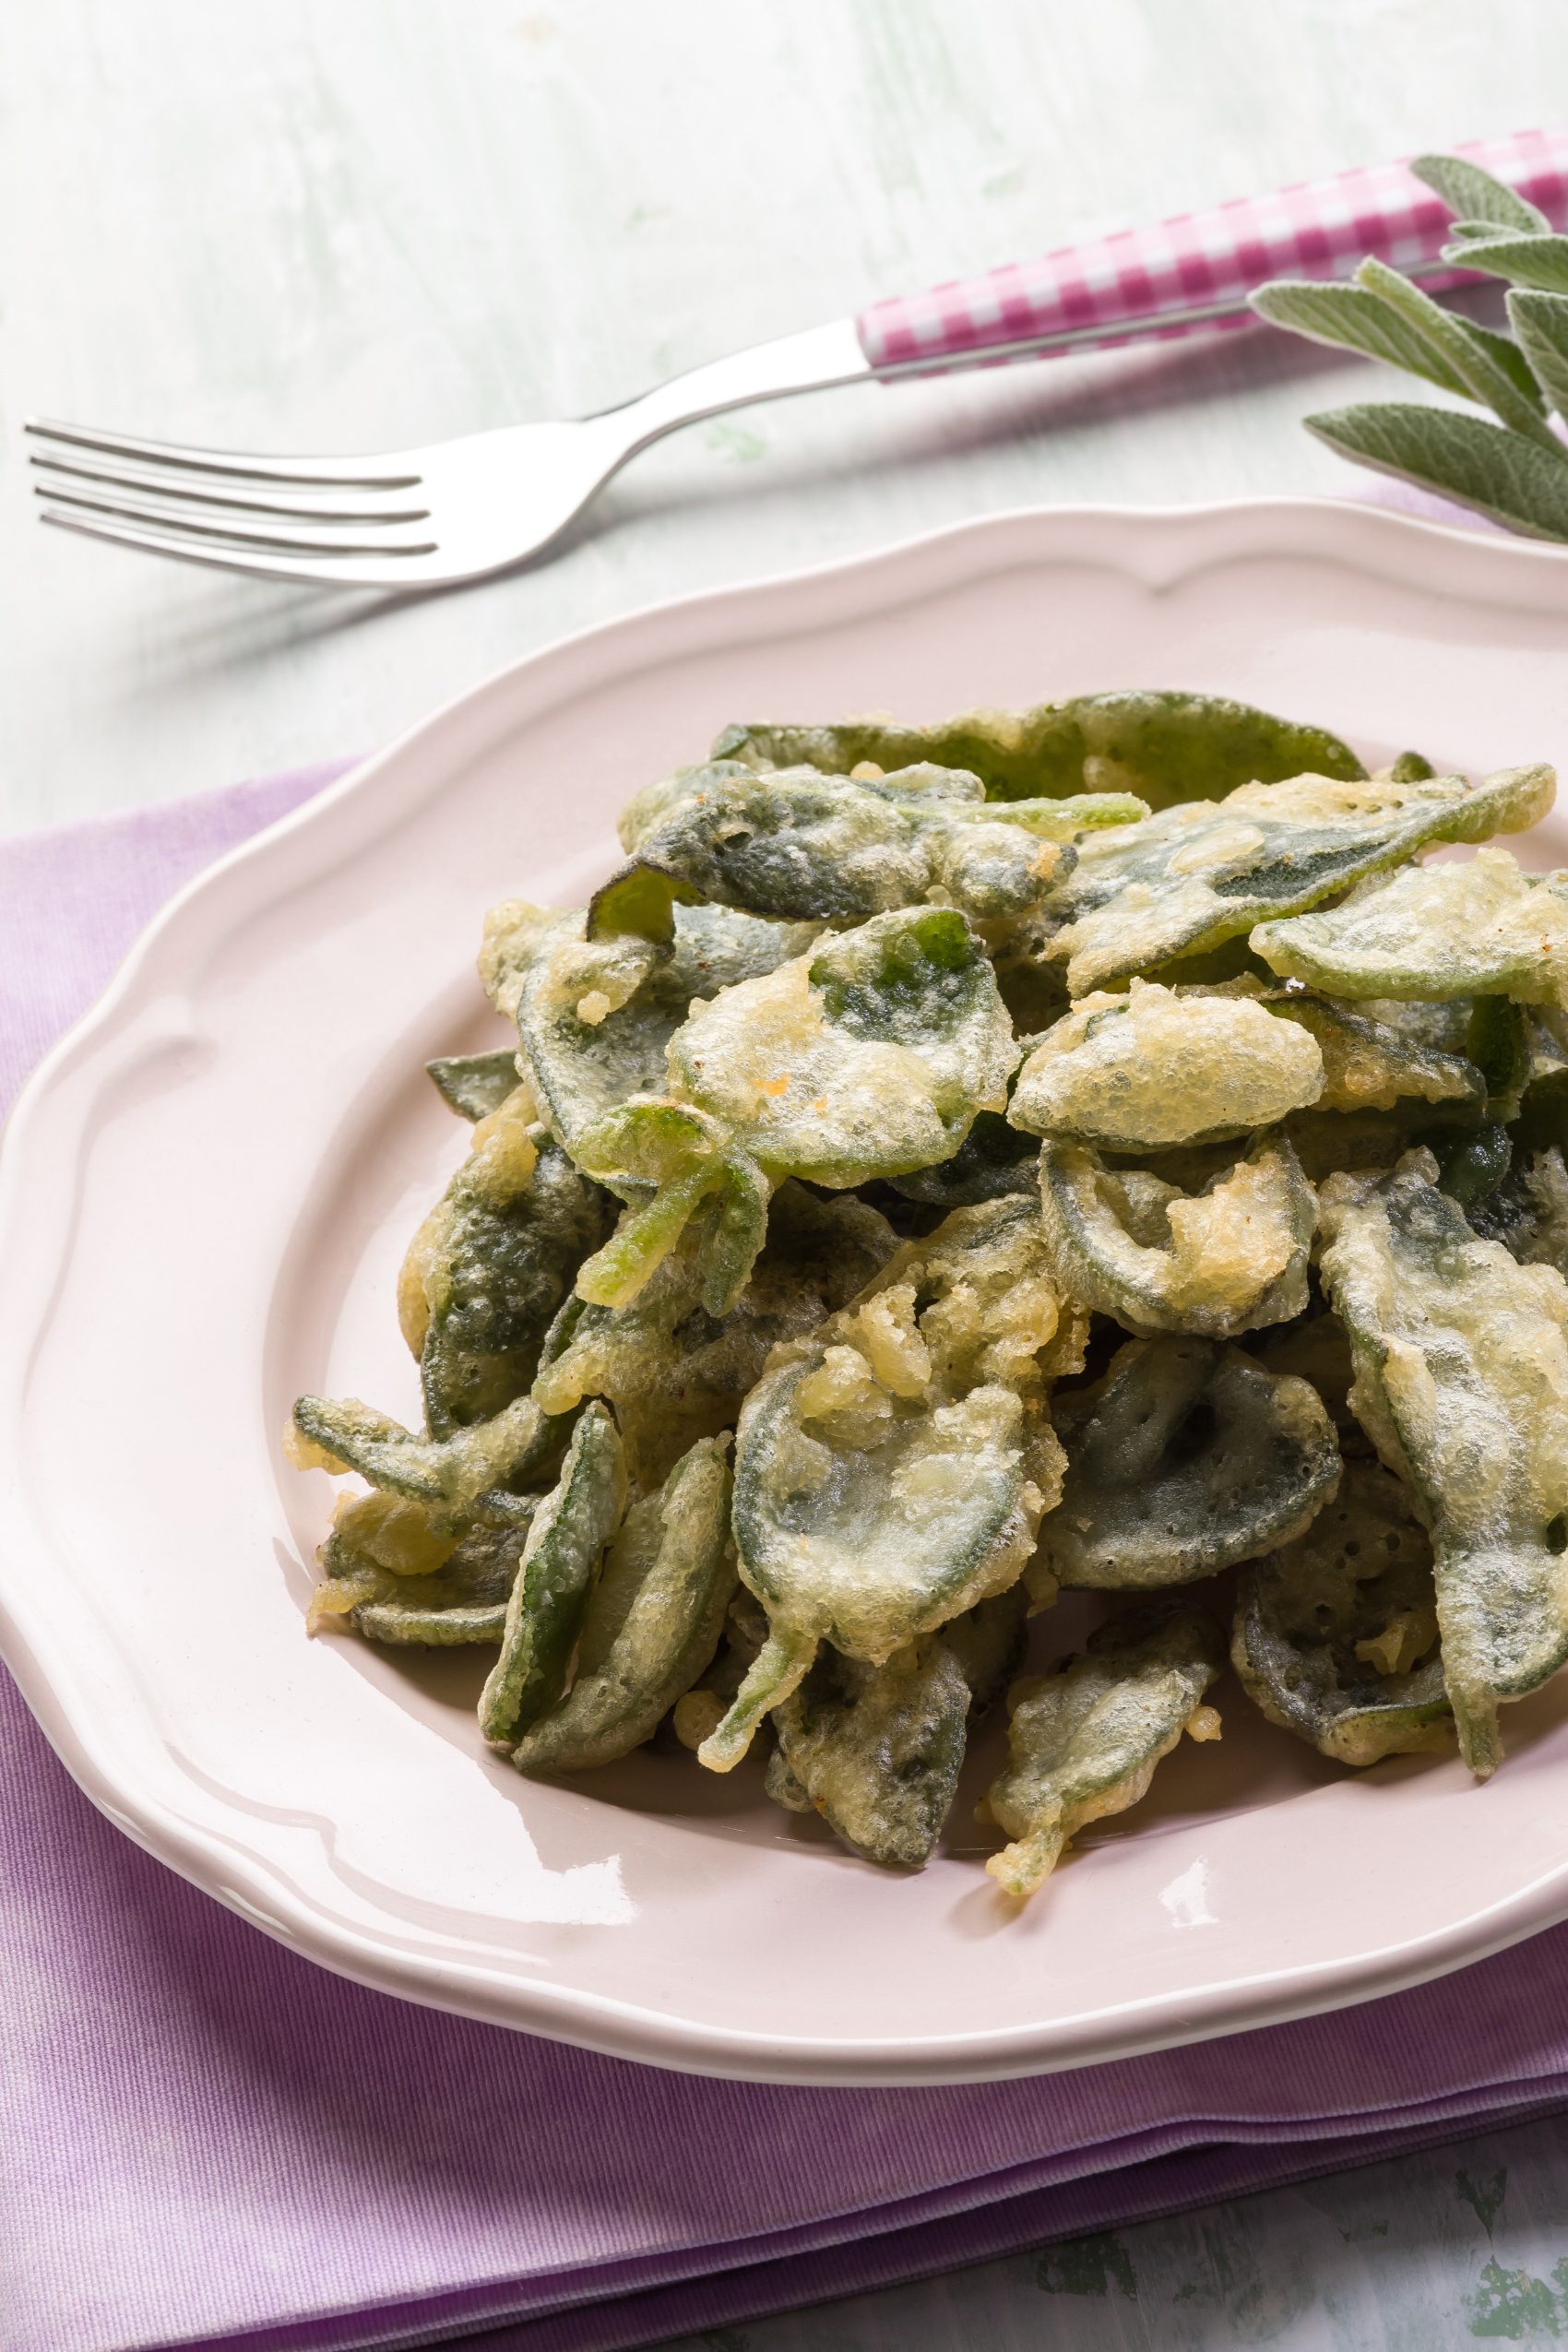 Salvia fritta, or fried sage leaves, on a plate